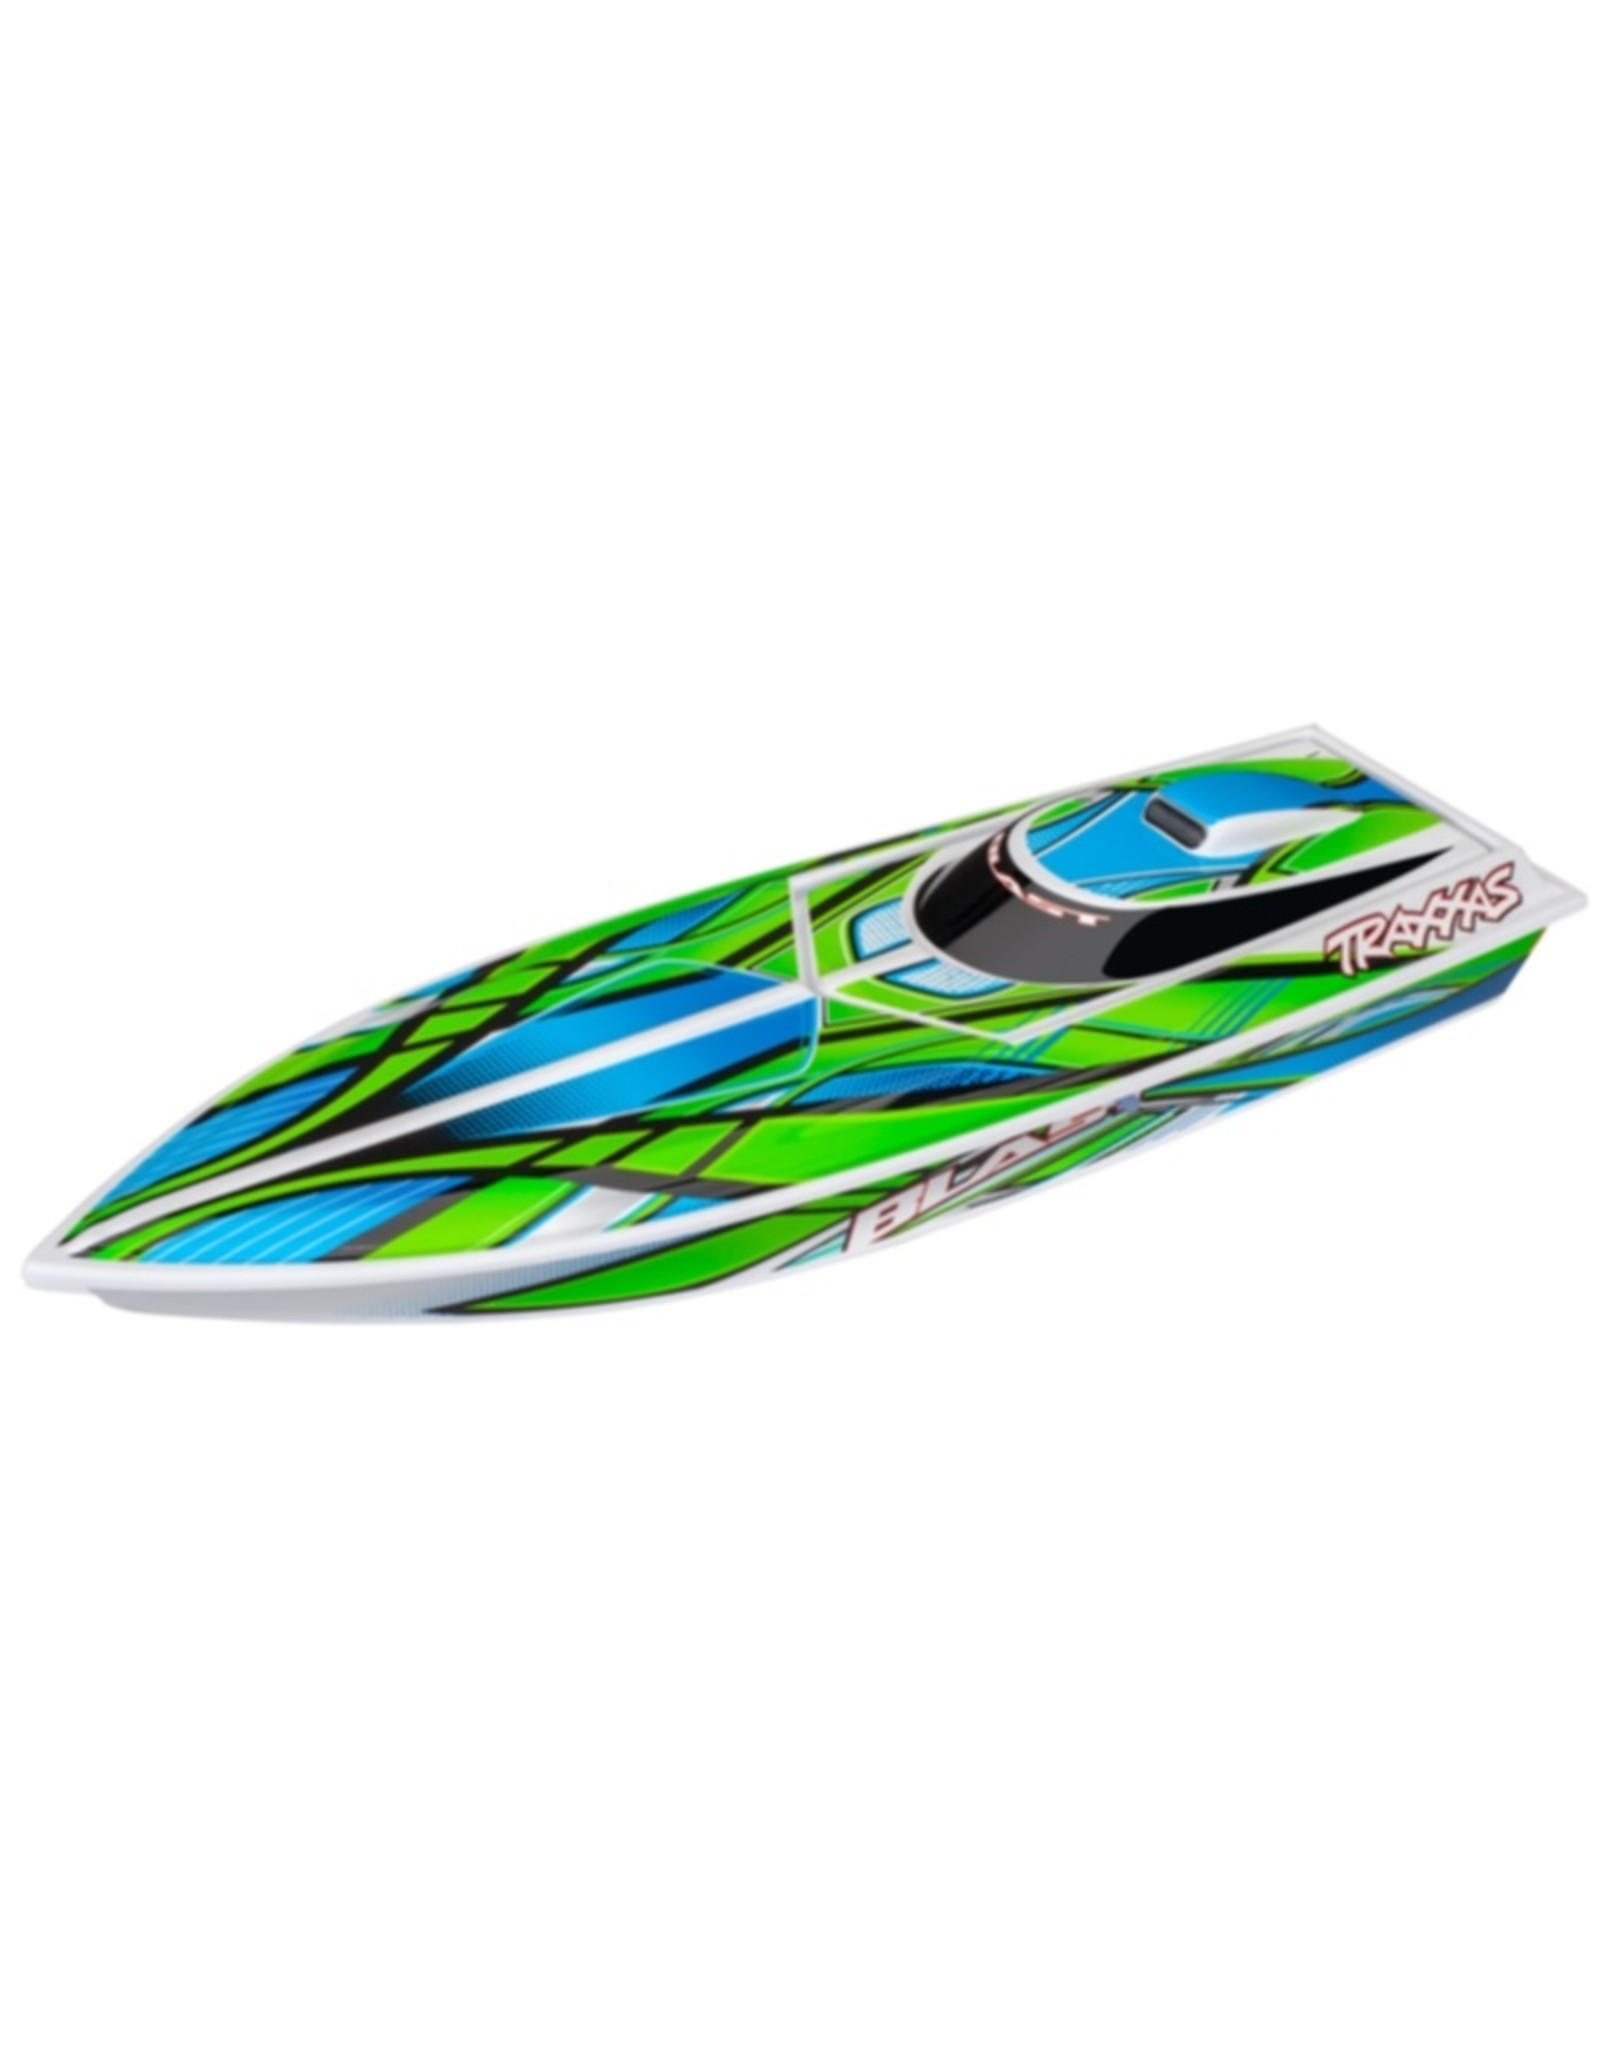 Traxxas TRA38104-1-GREEN  Blast: High Performance Race Boat with TQ 2.4GHz radio system